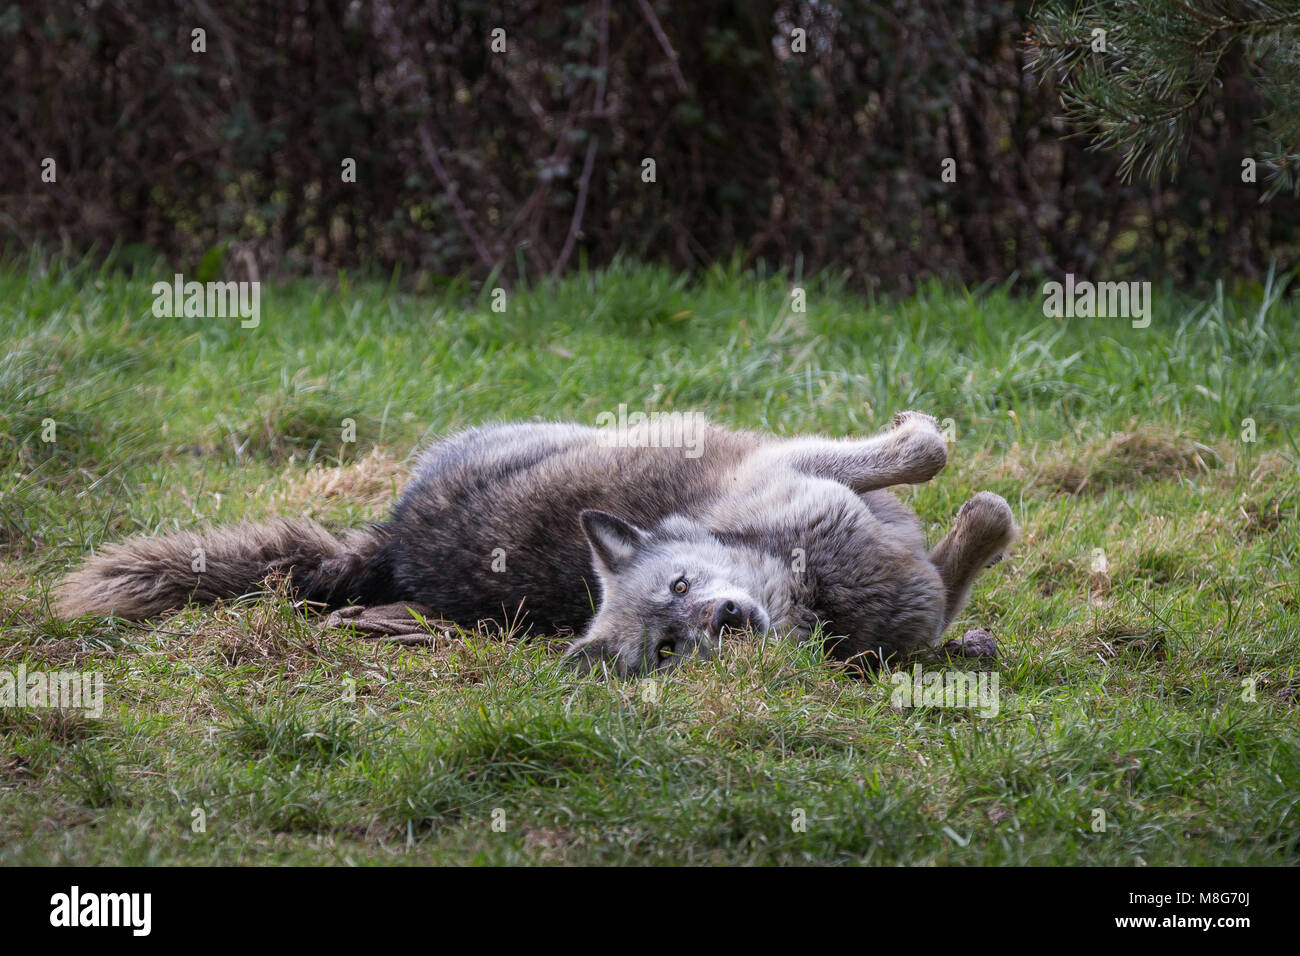 Wolf pictured in U conservation society, Wolves are held in large areas and well looked after, They have saved many wolves from certain death. Stock Photo